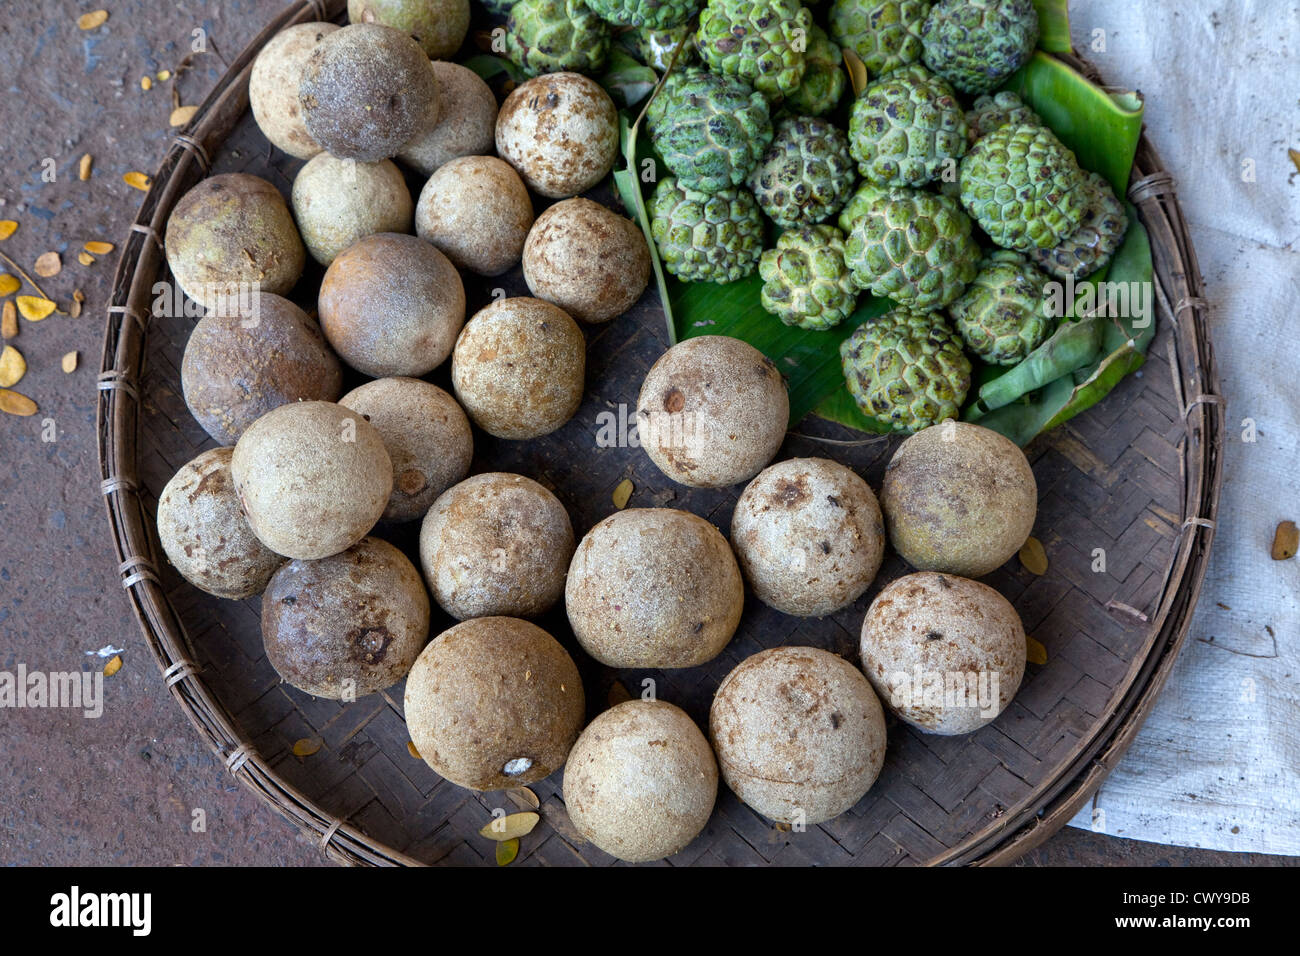 Myanmar, Burma, Mandalay. Wood-Apples (brown) and Custard Apples (green) for Sale in the Market. Stock Photo